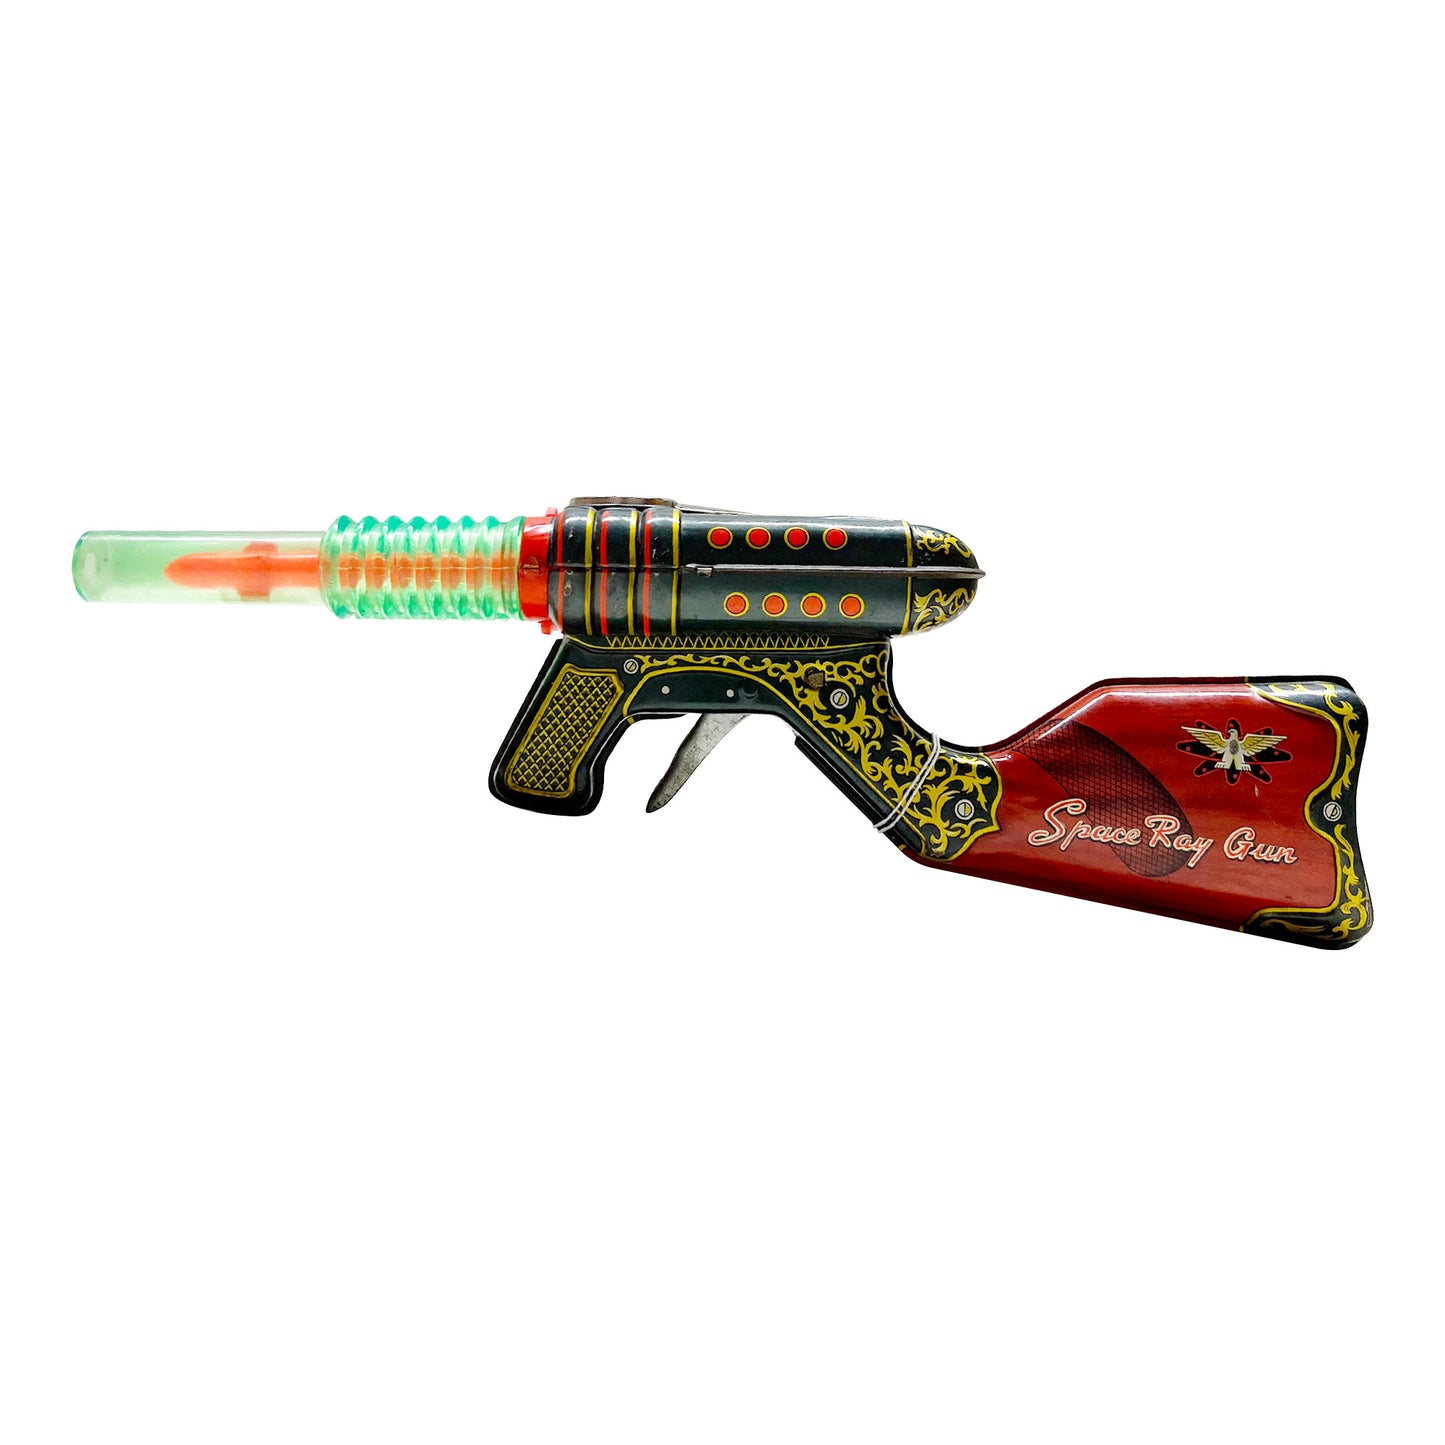 Double Barrel 1960 Space Ray Gun 14" Made in Japan